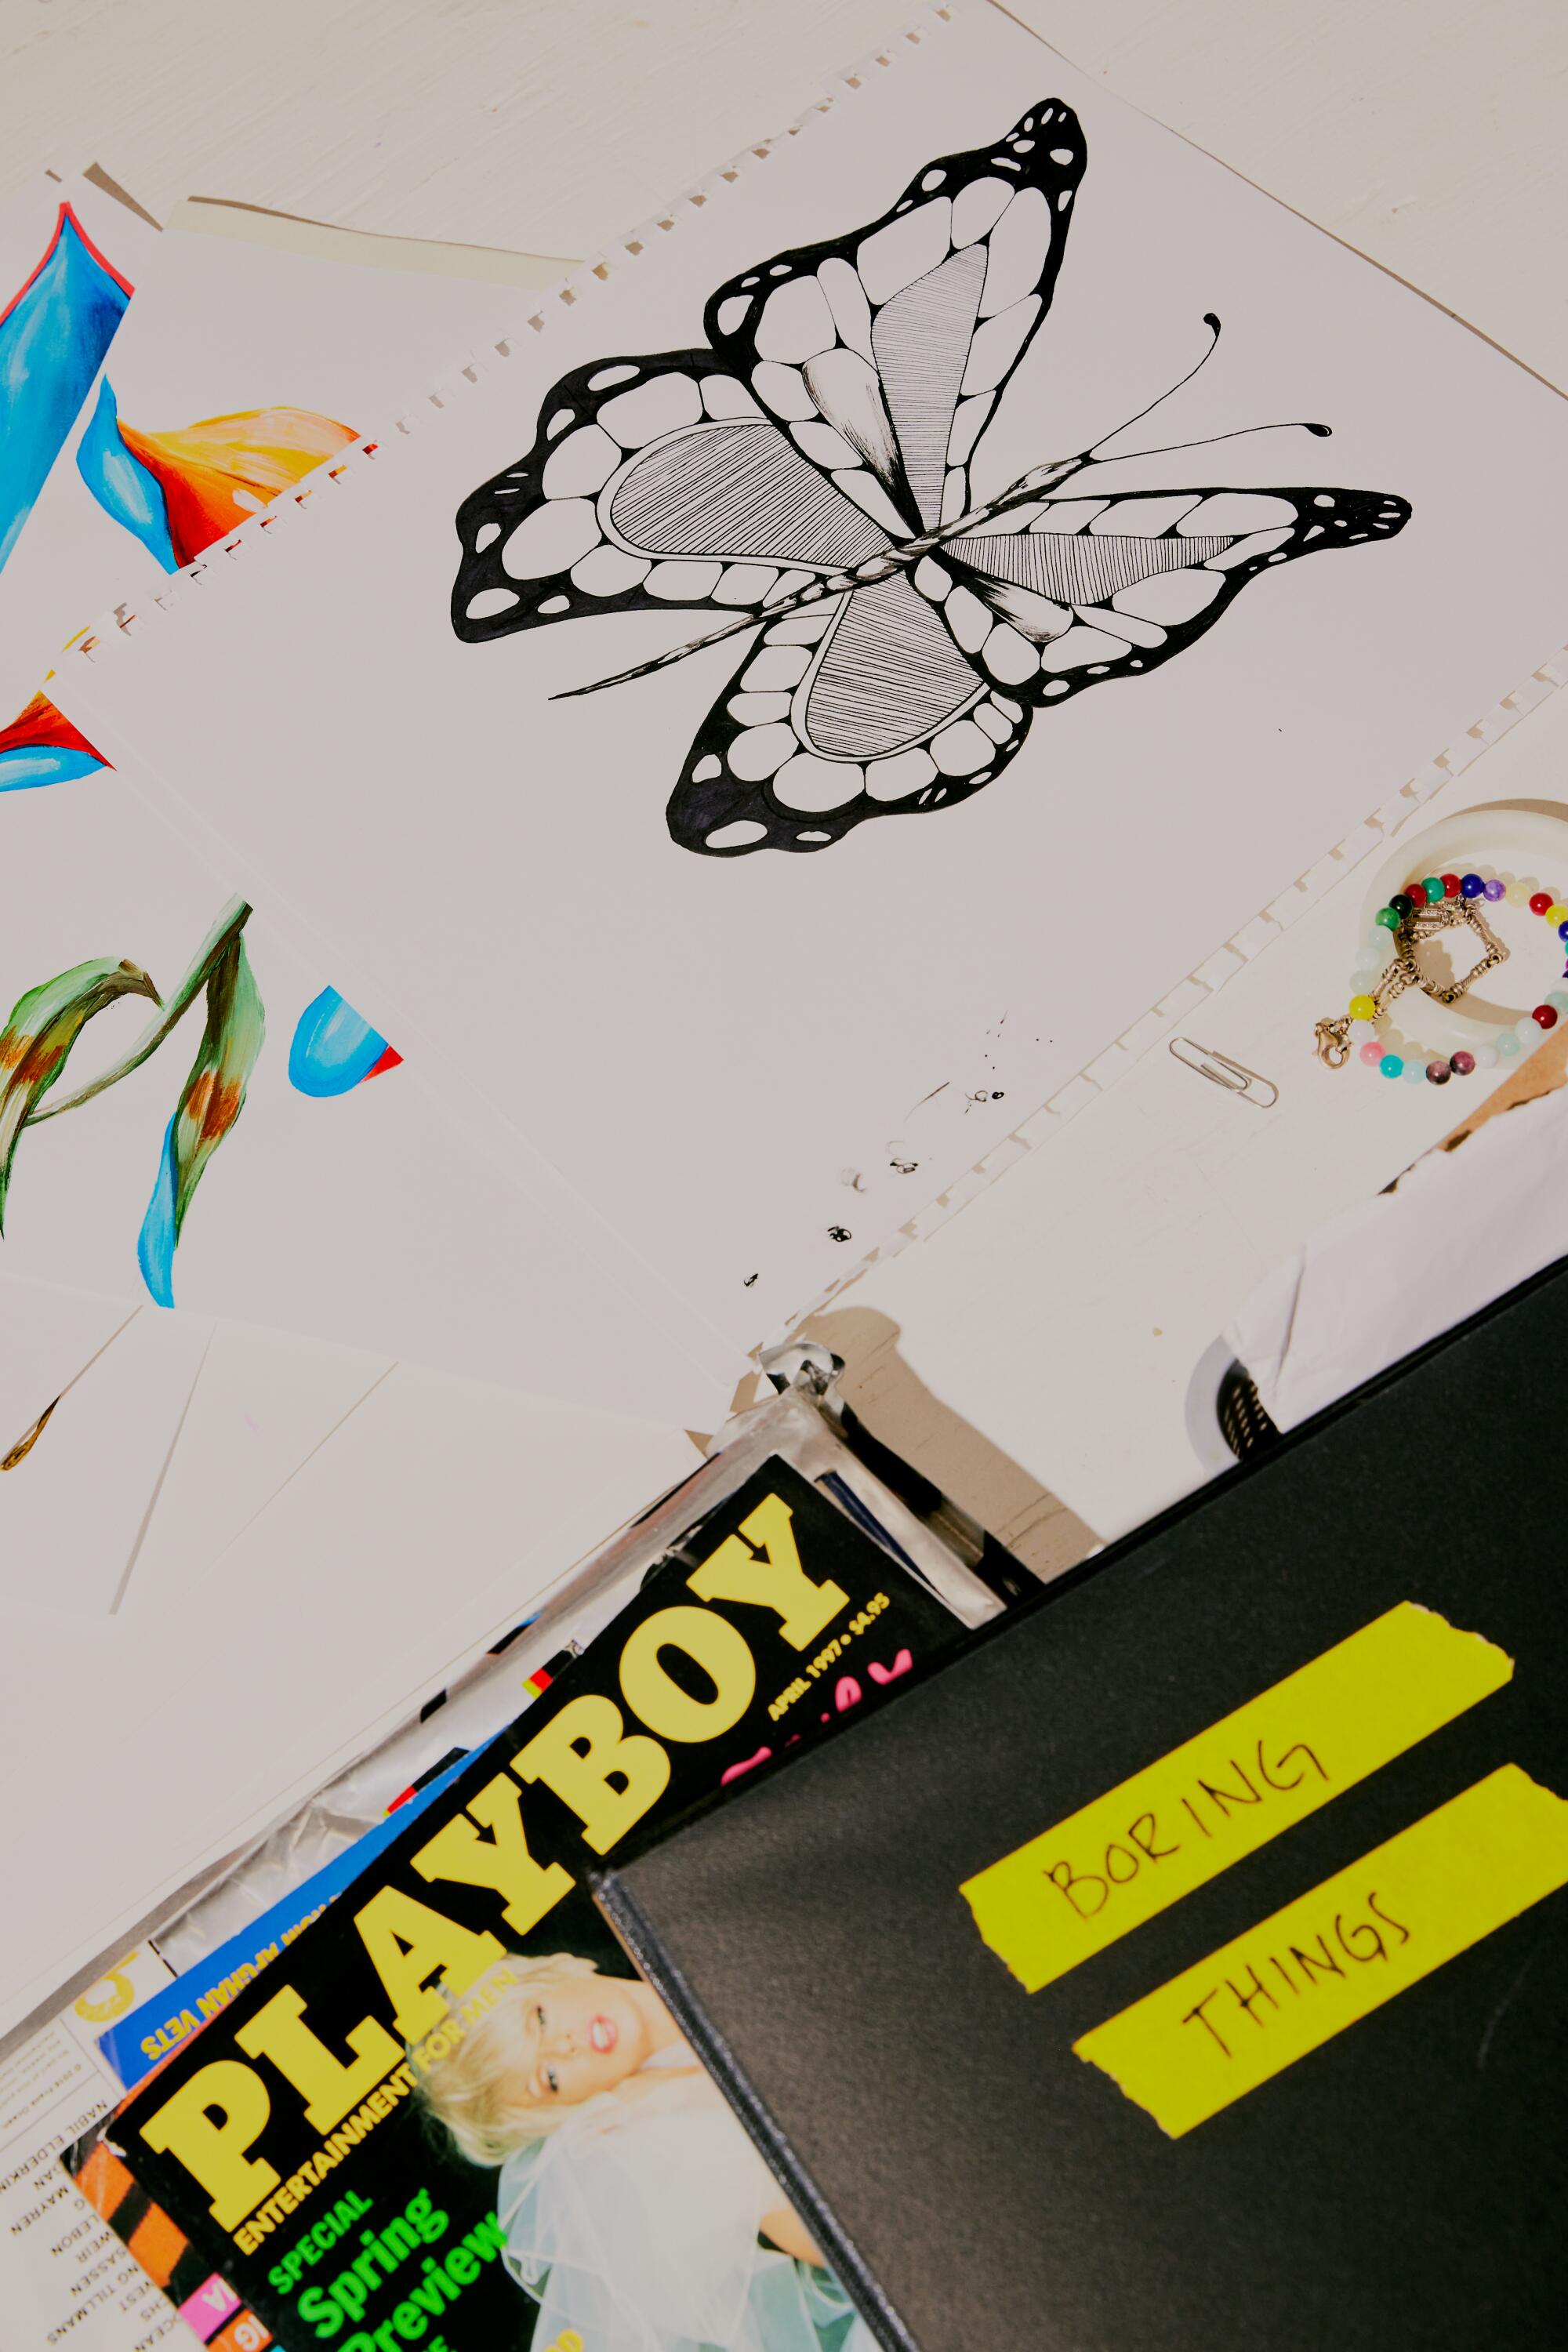 A drawing of a butterfly, a Playboy magazine, and a folder with a title "Boring stuff."